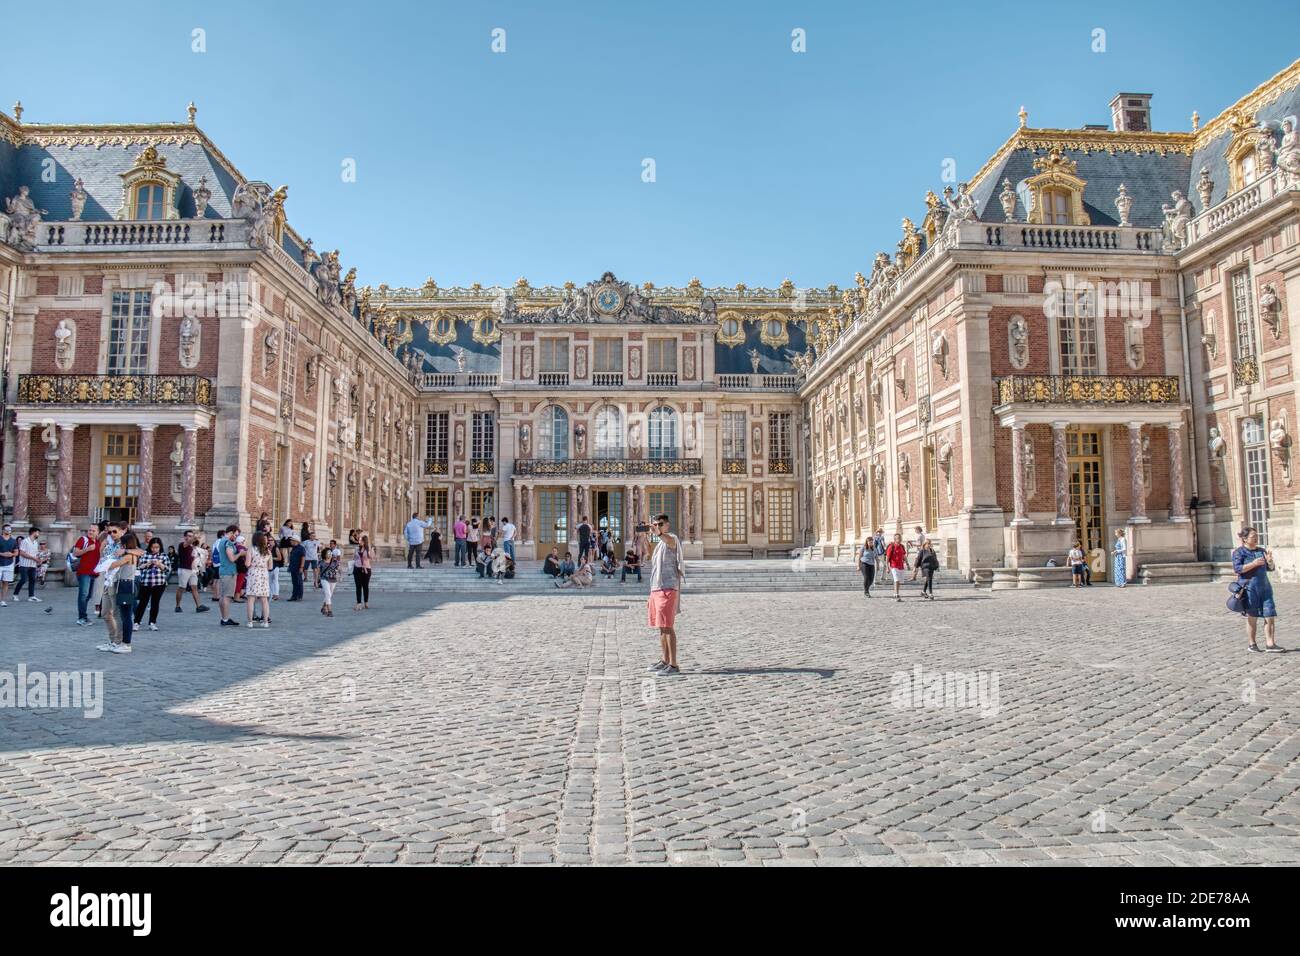 Versailles, France - September 15, 2019: A tourist taking a selfie in front of the Palace of Versailles Stock Photo